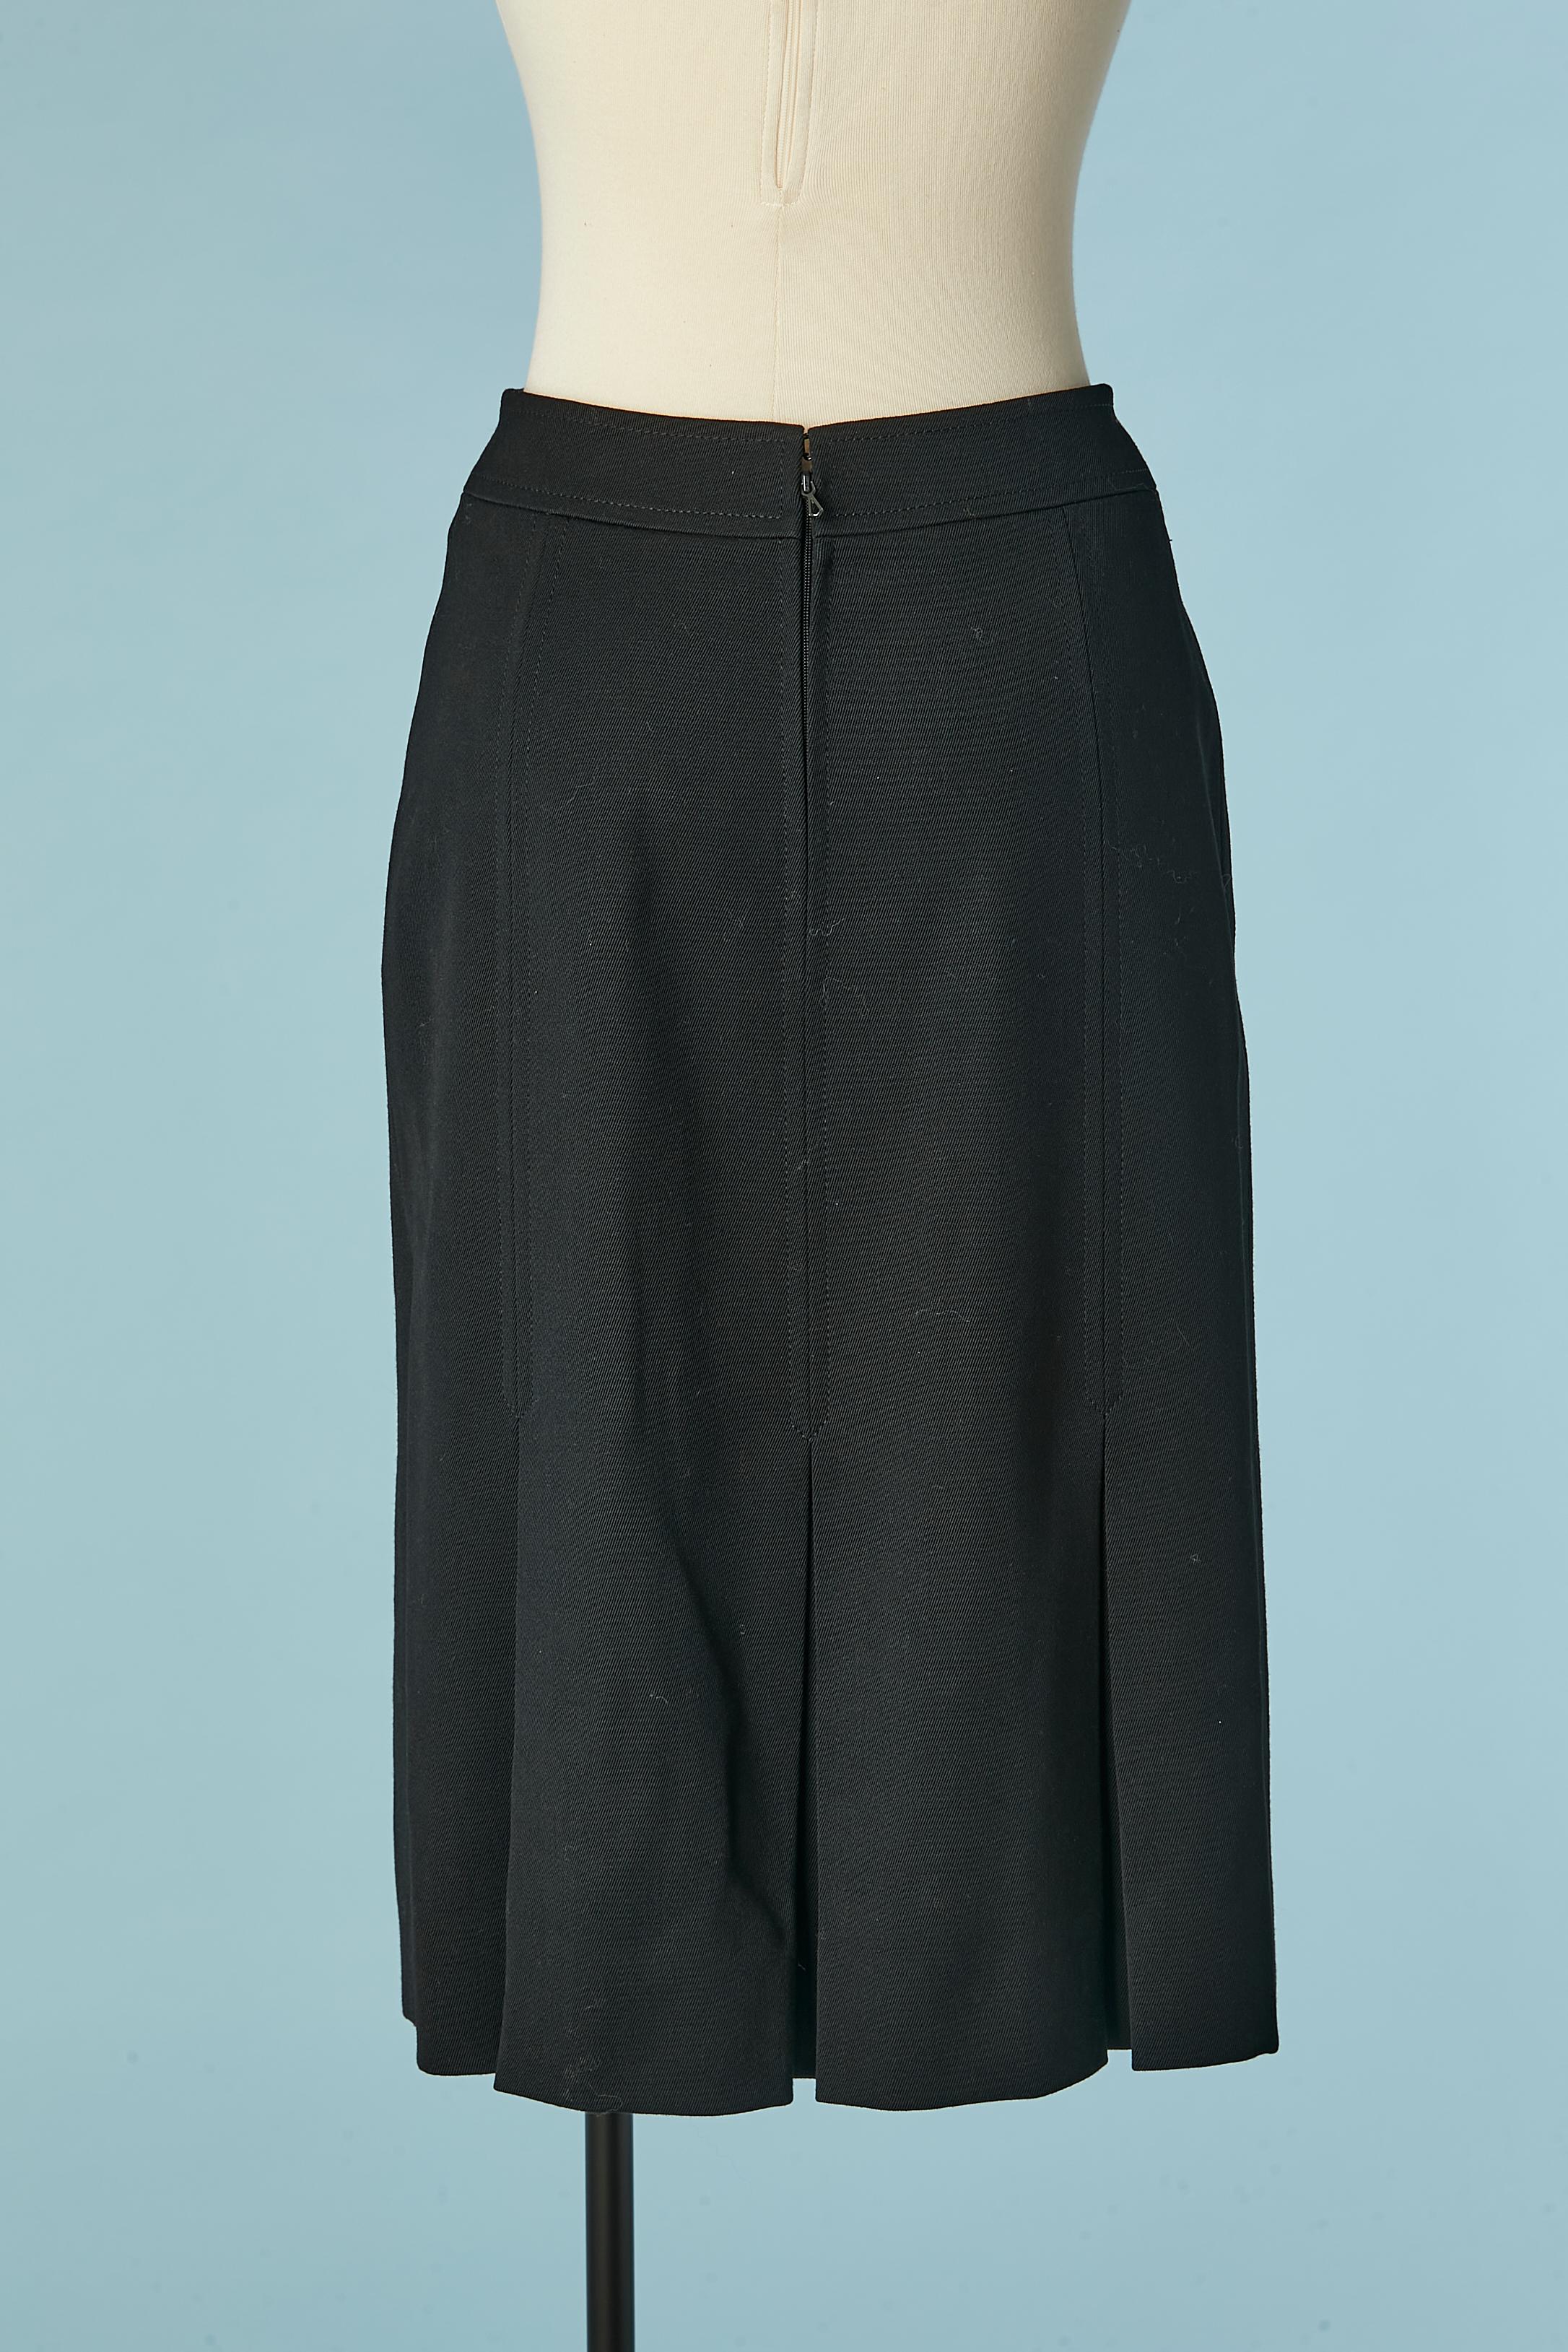 Women's Black wool skirt with box pleats and gold metal buckle on the waist CELINE For Sale